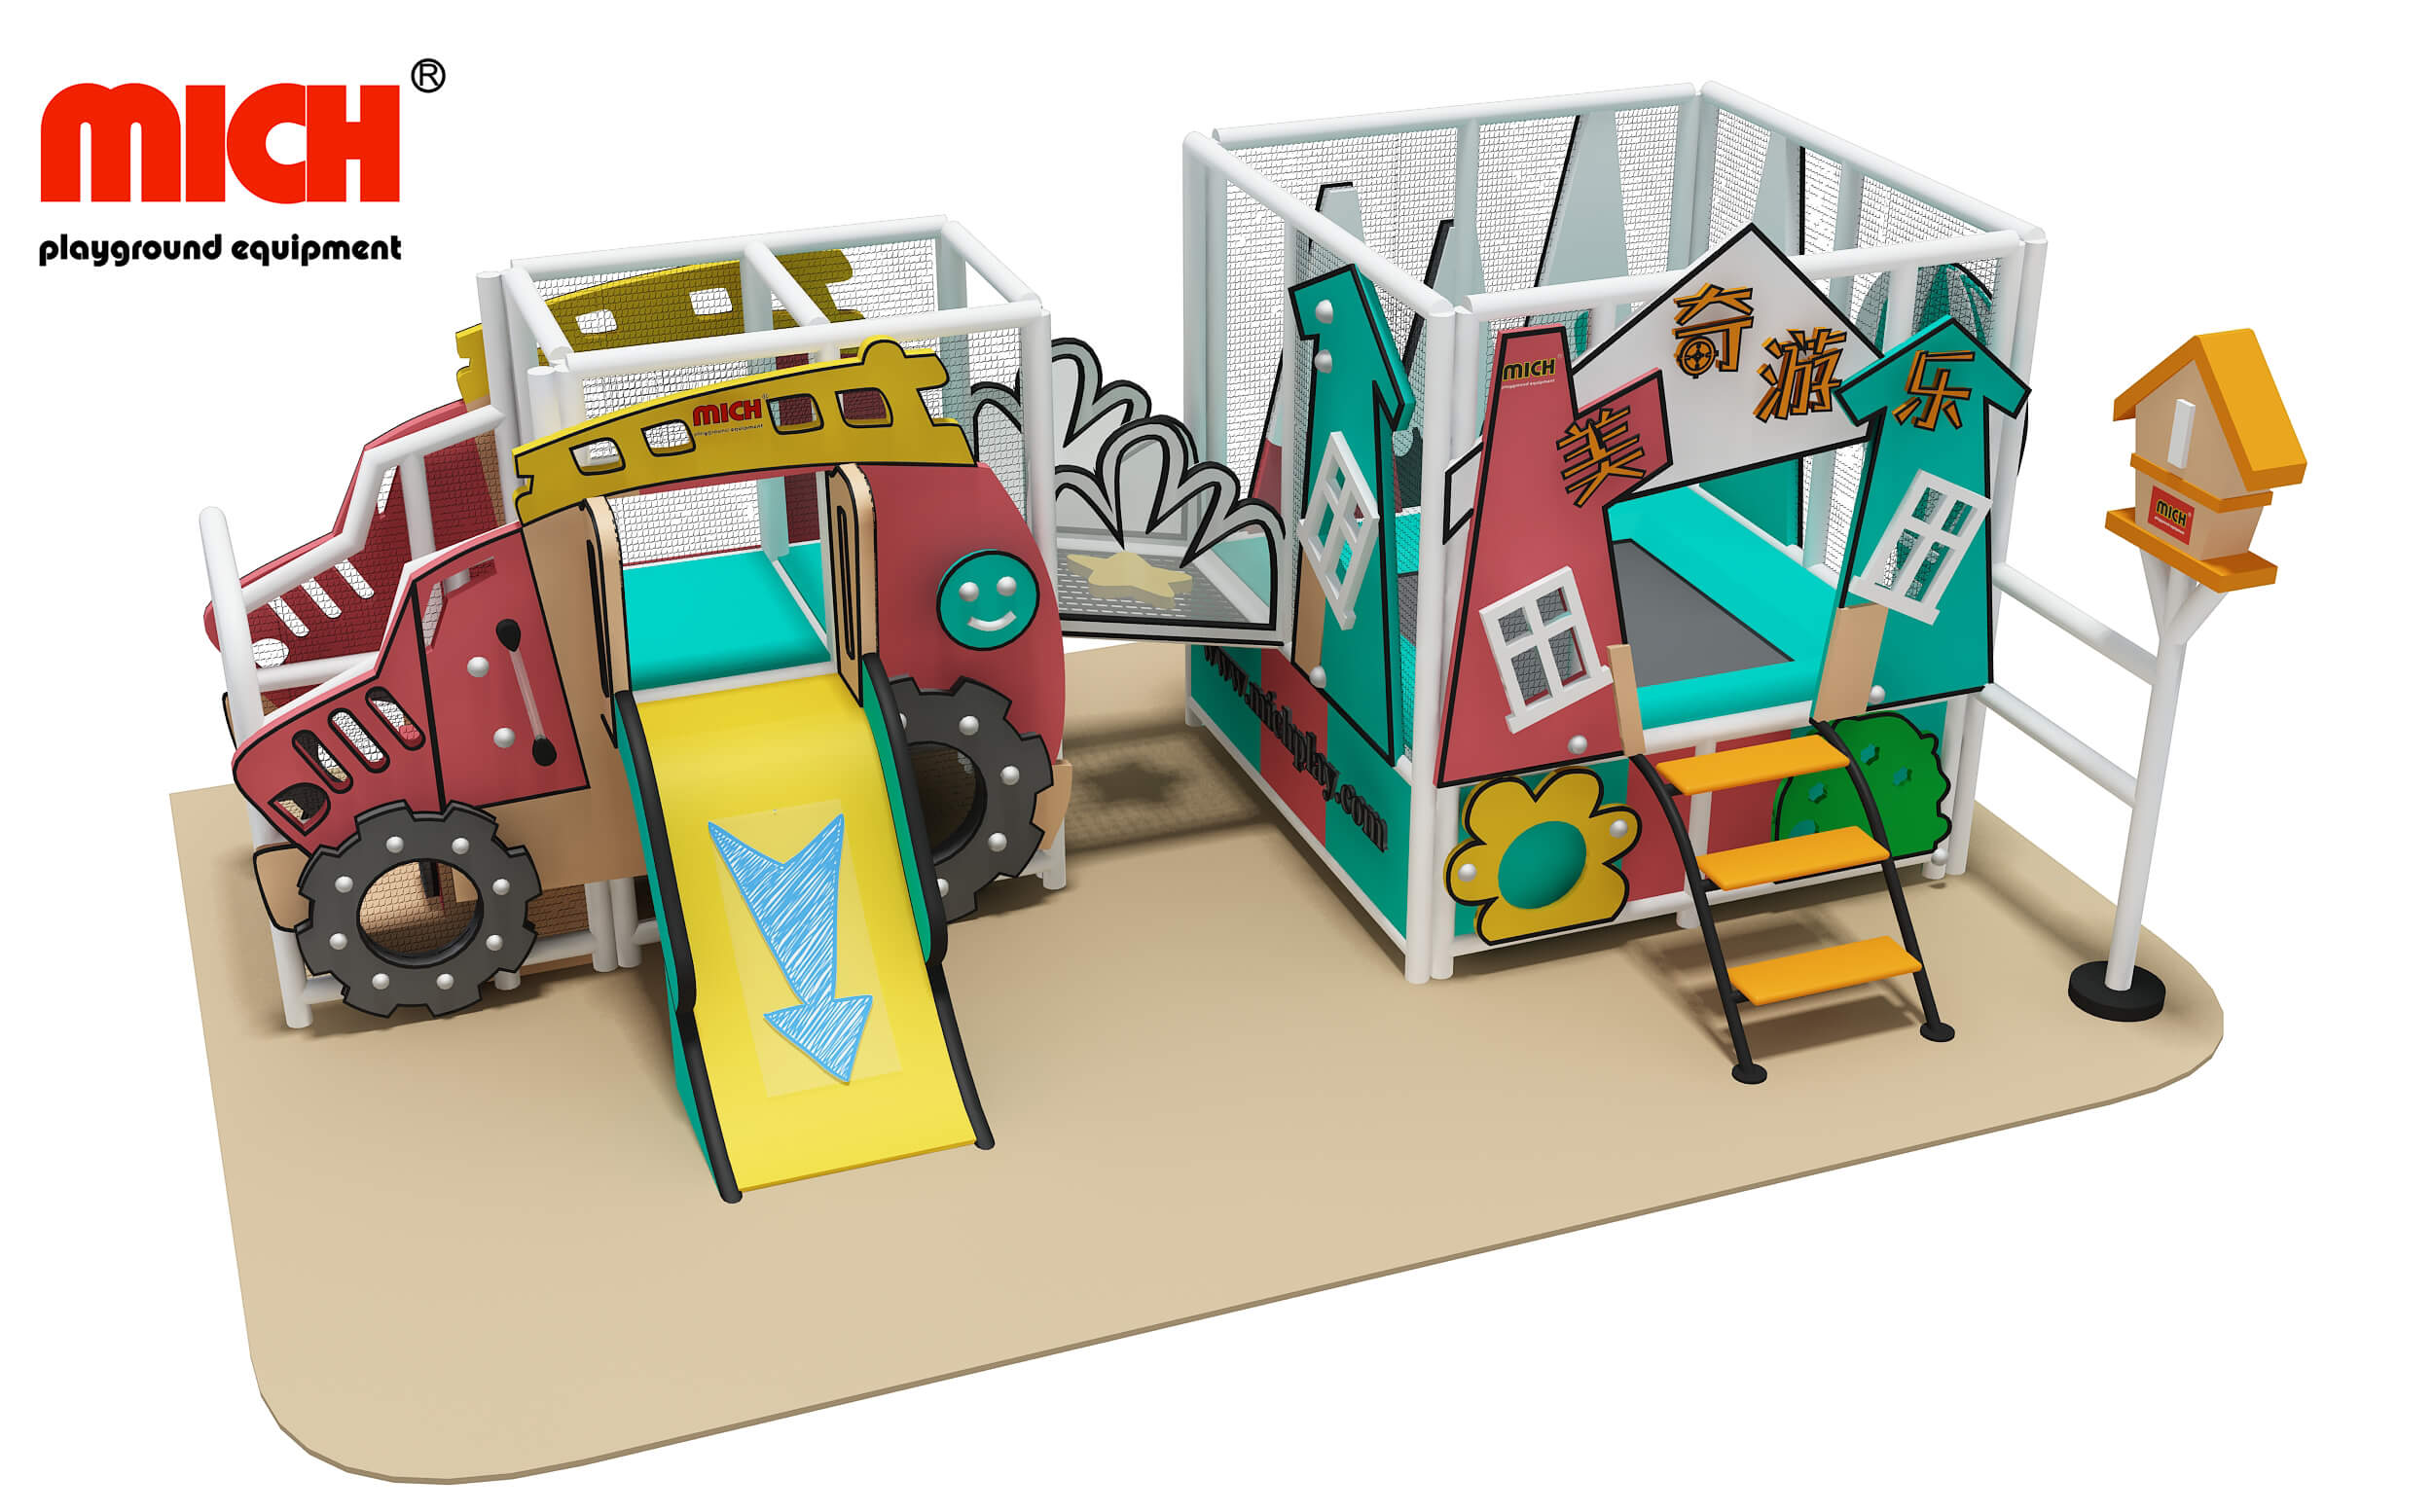 What are the advantages of indoor playground equipment?